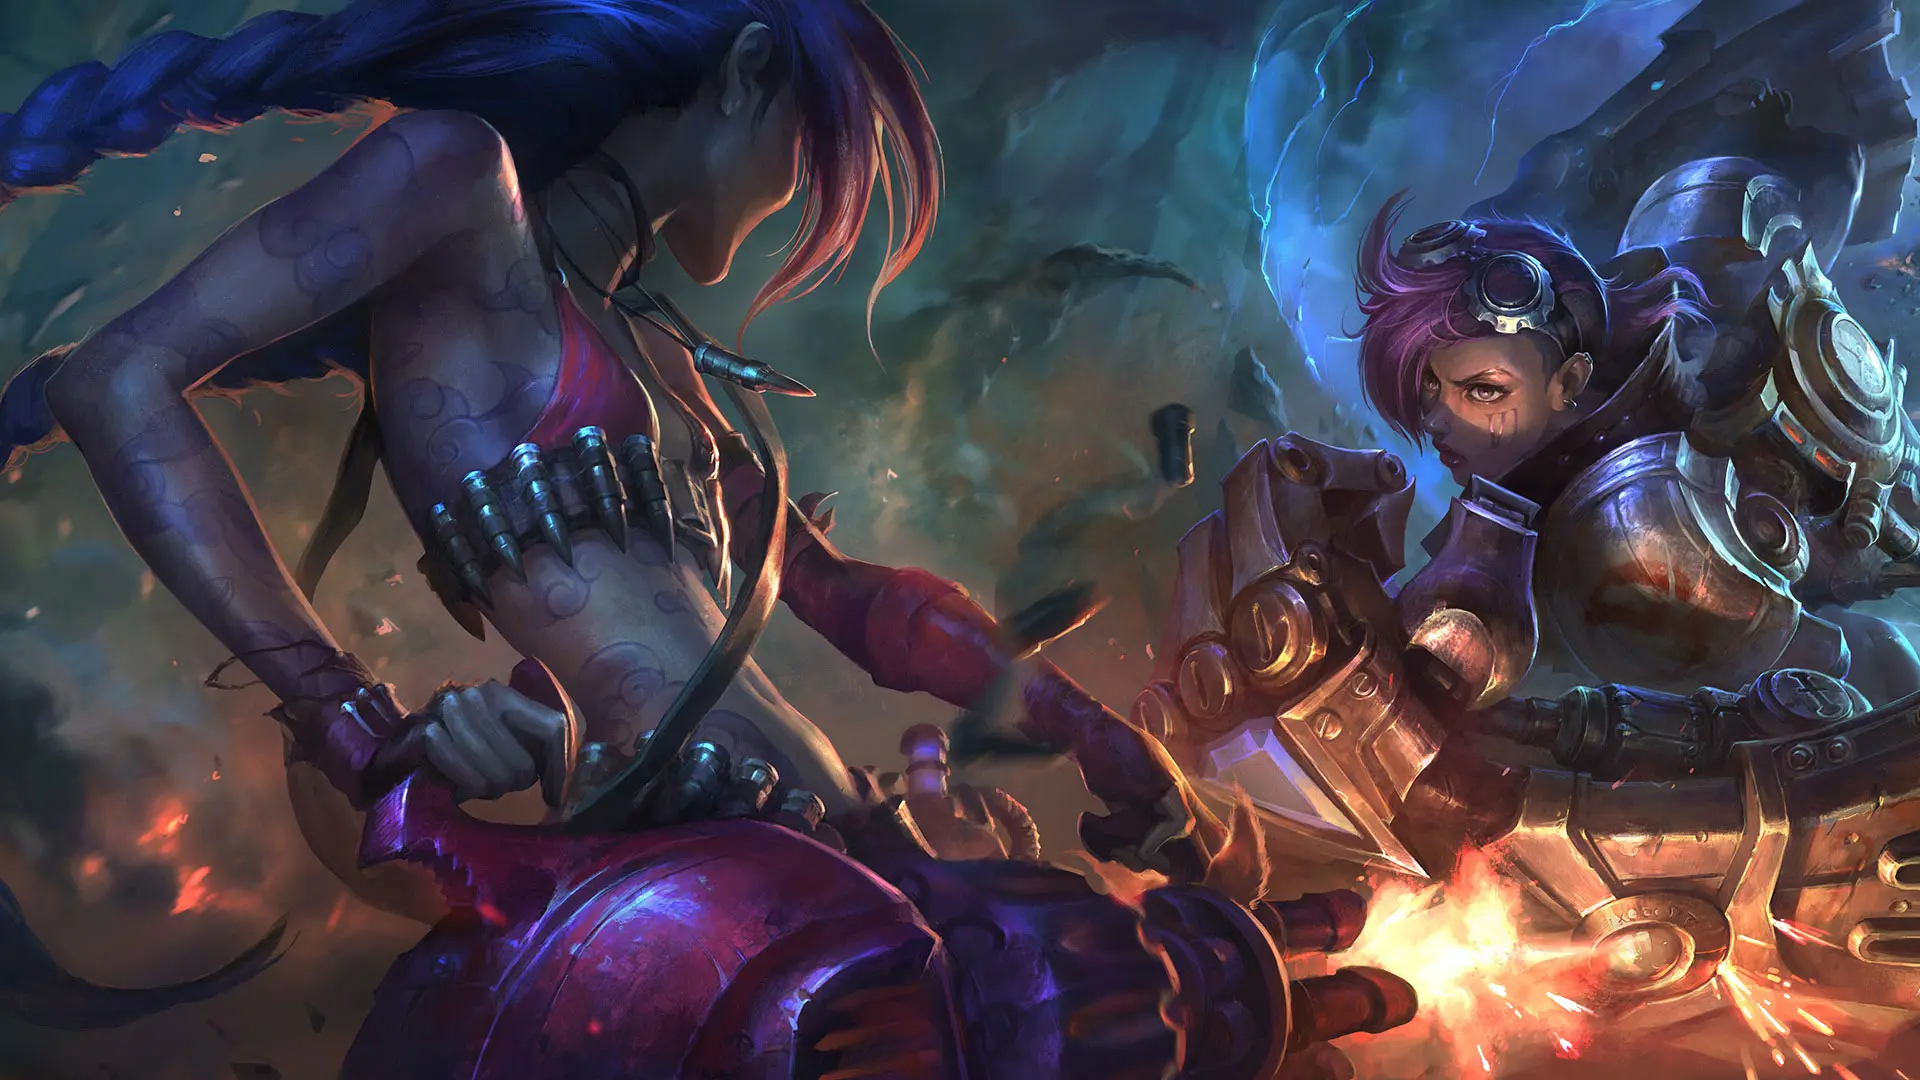 Happy (belated) Lunar New Year! Mark(smen) your calendars because patch 13.1B has tons of ADC adjustments!